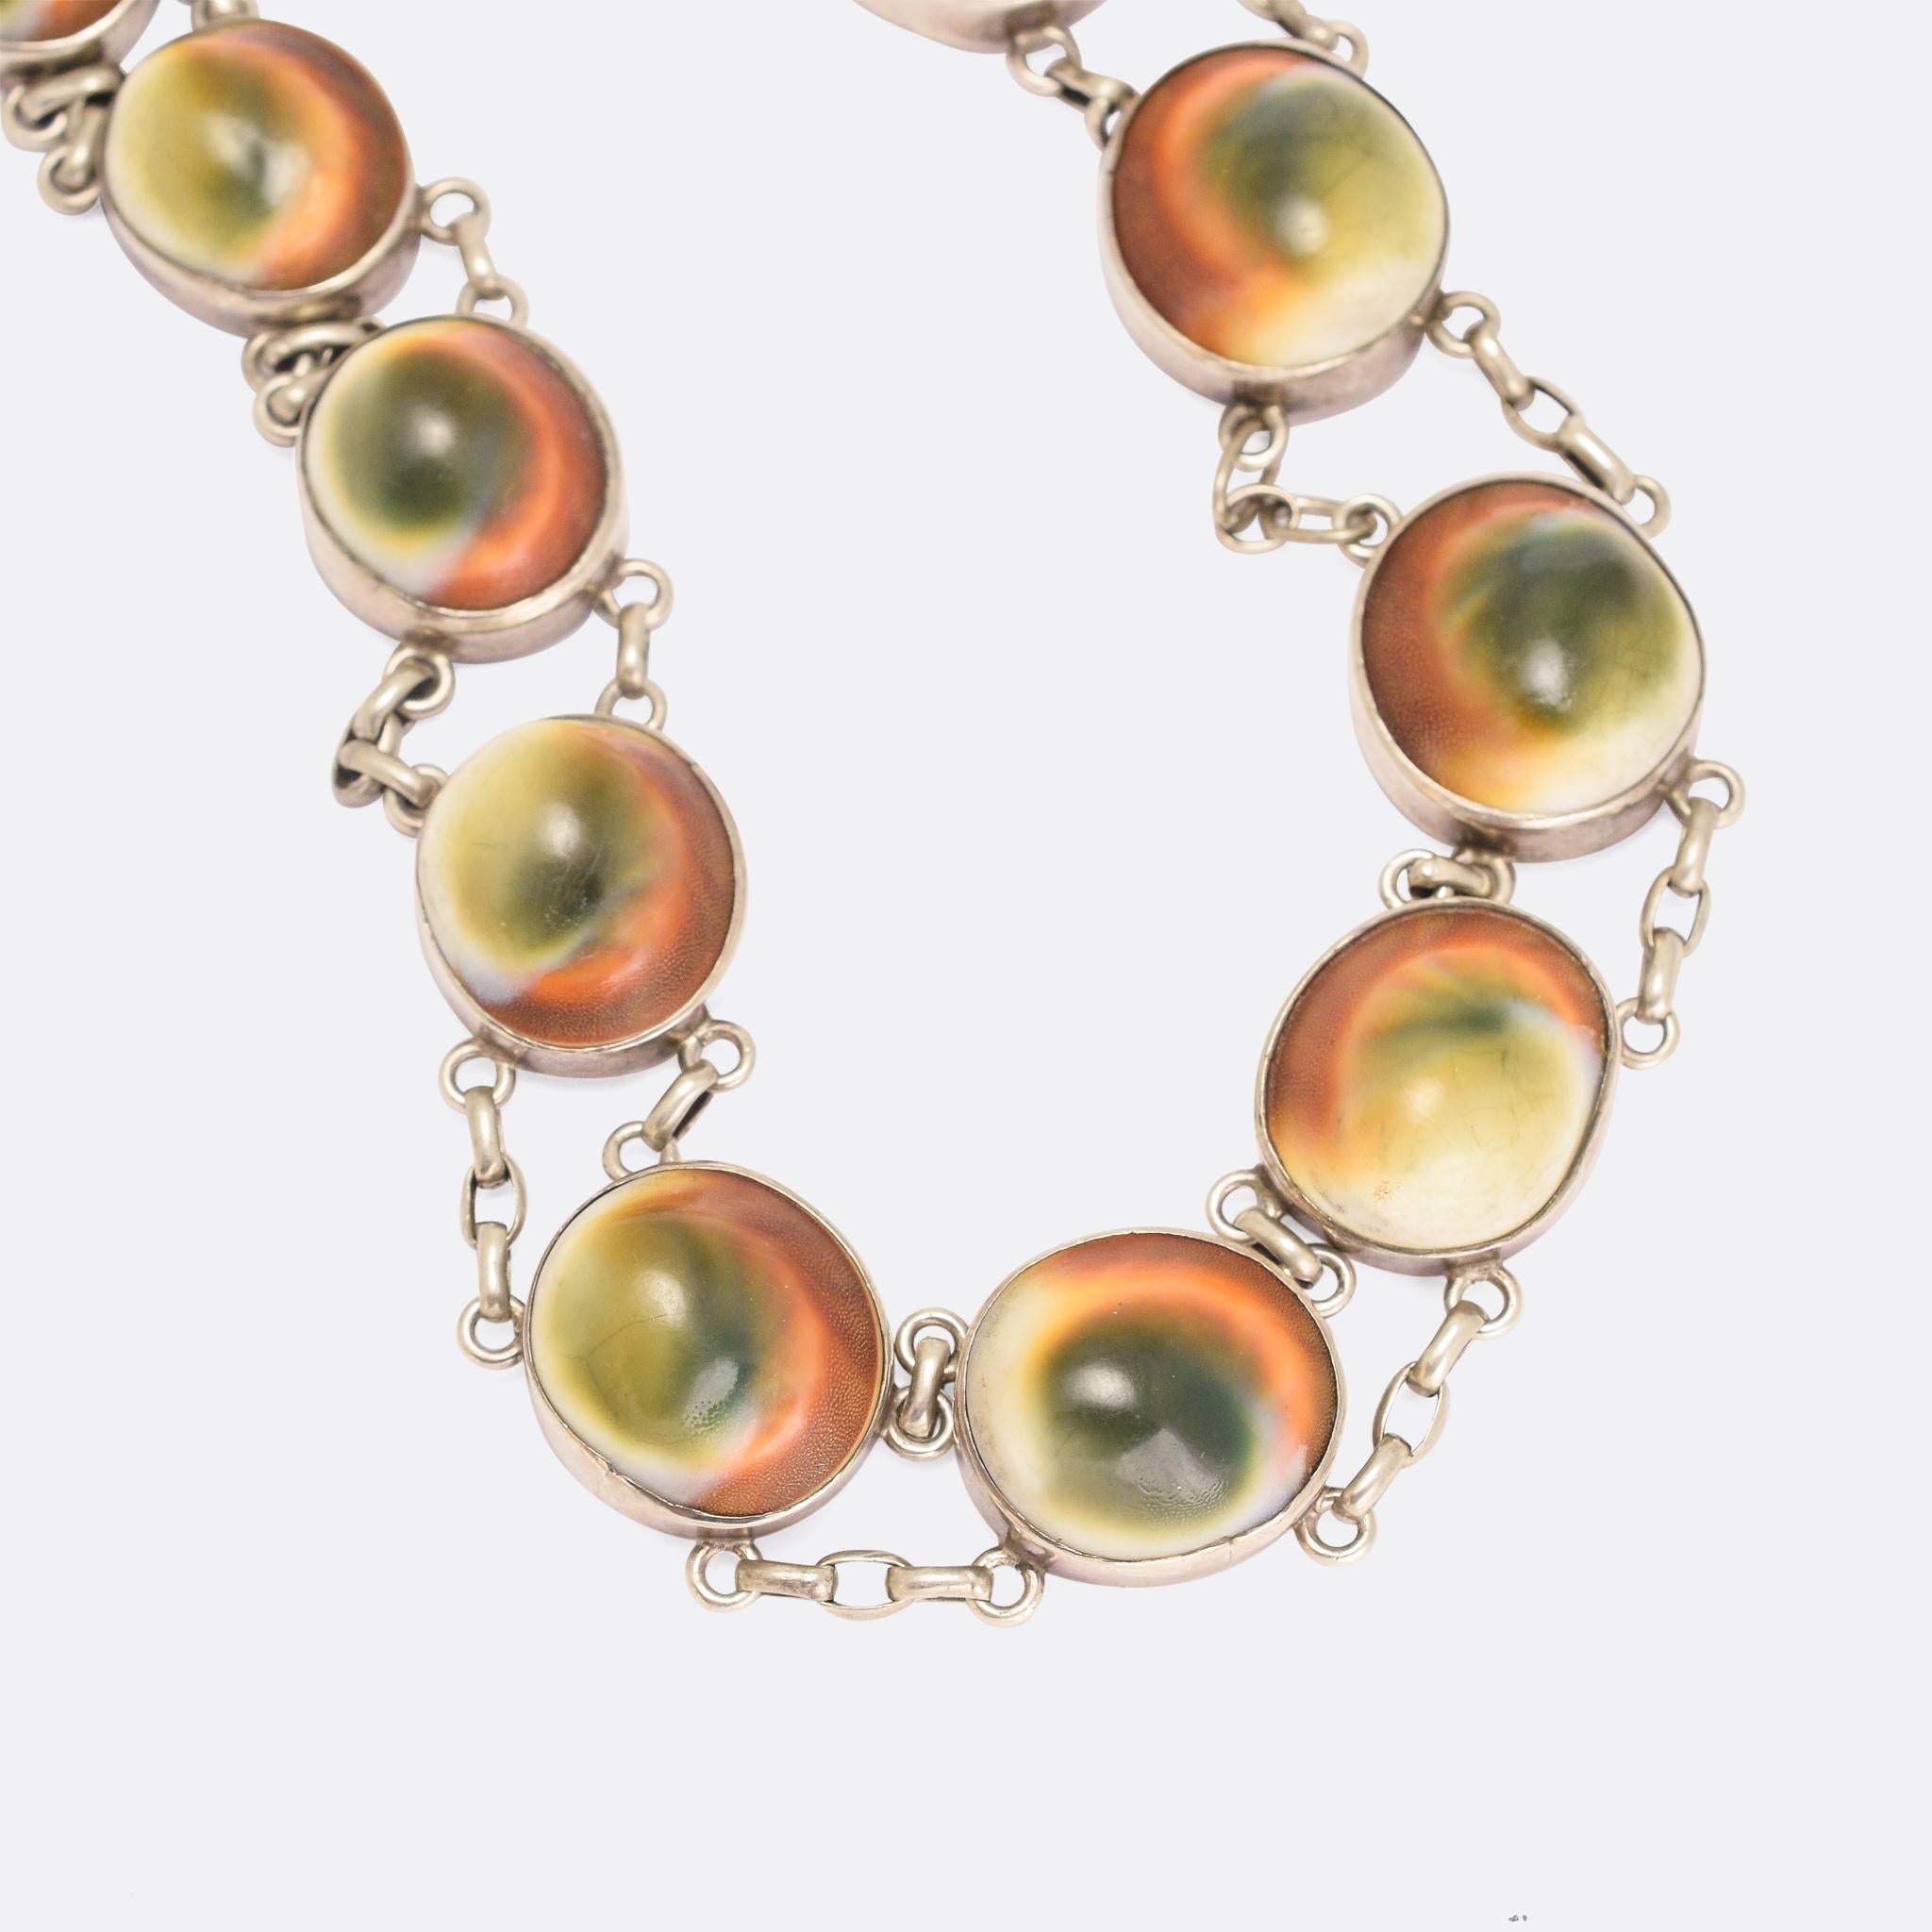 An unusual antique riviere necklace set with 15 operculum stones. These curious 'gemstones' (commonly known as cat's eye or shiva's eye) arean anatomical part of the marine snail; operculum literally means 